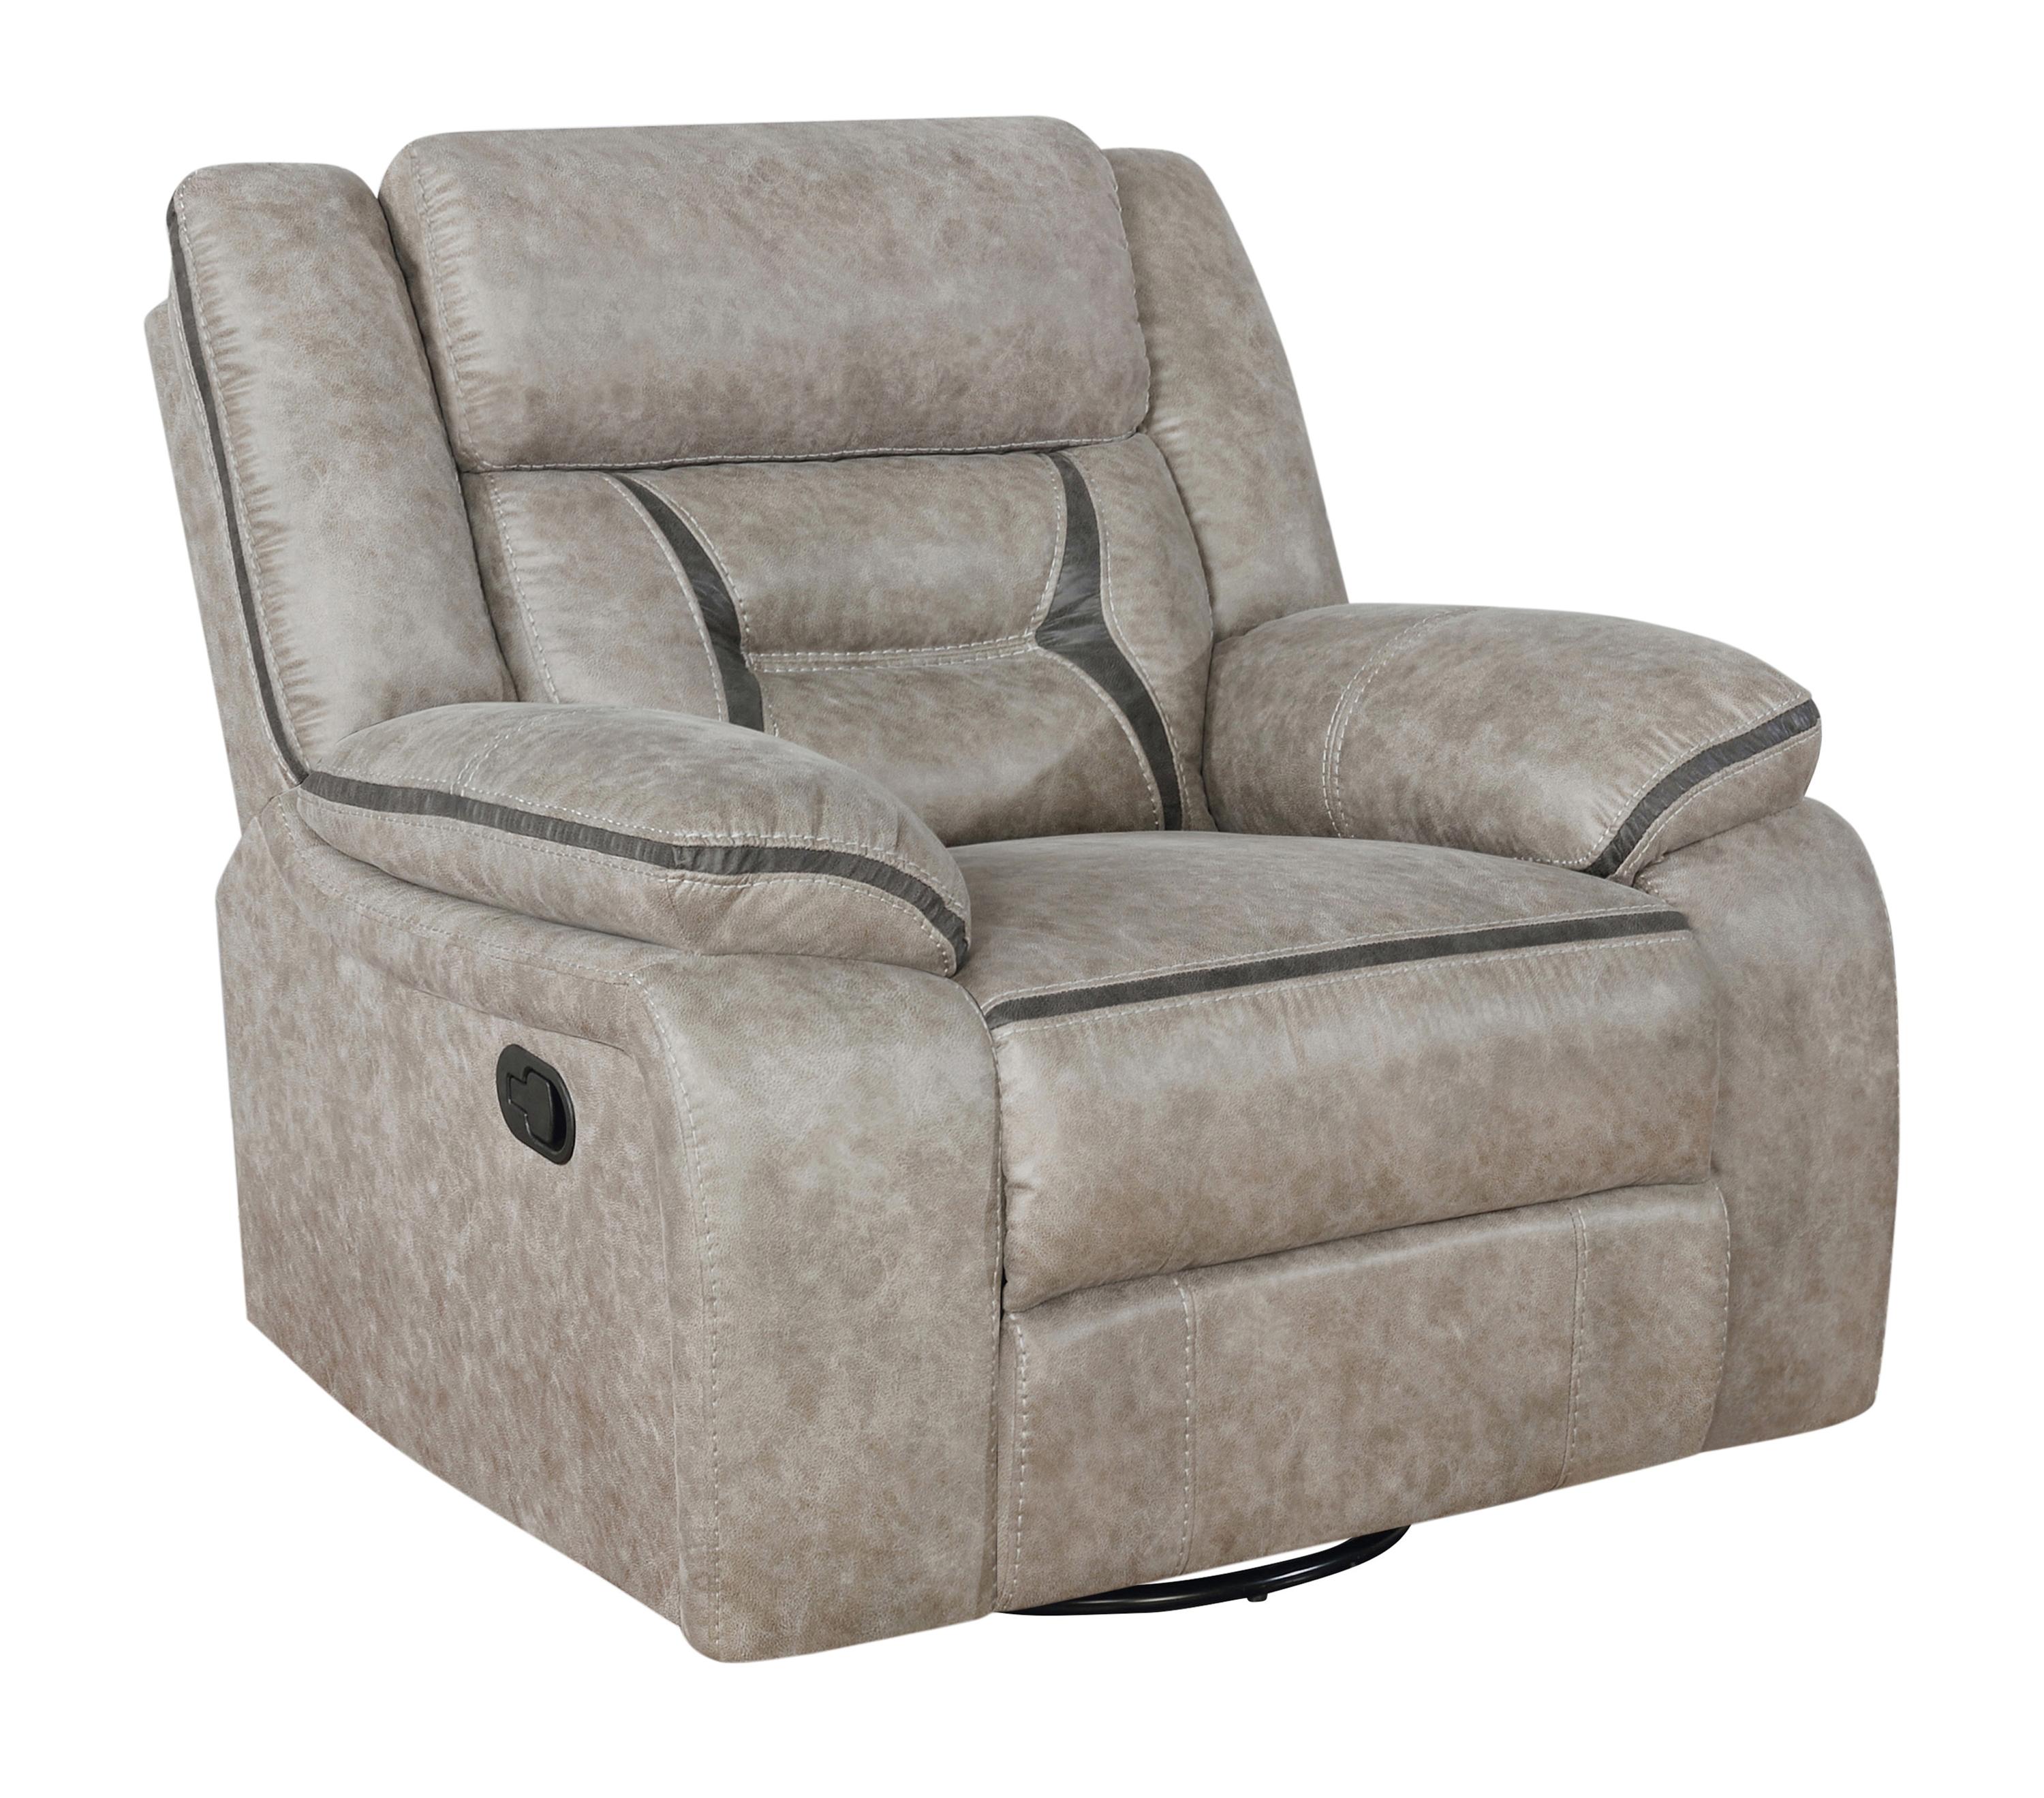 Transitional Glider recliner 651353 Greer 651353 in Taupe Leatherette